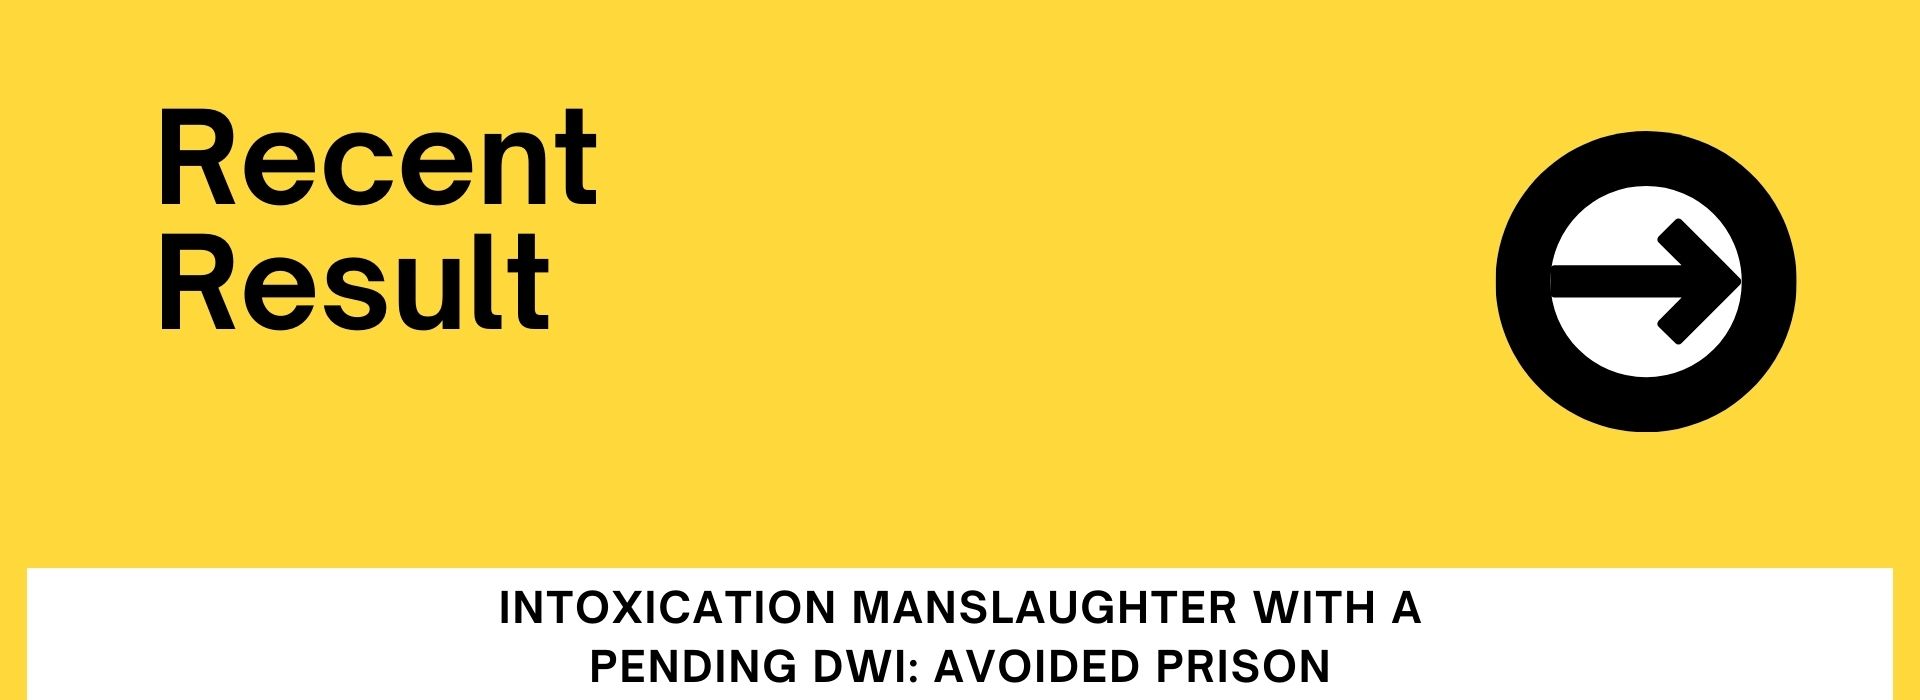 recent result on intoxication manslaughter